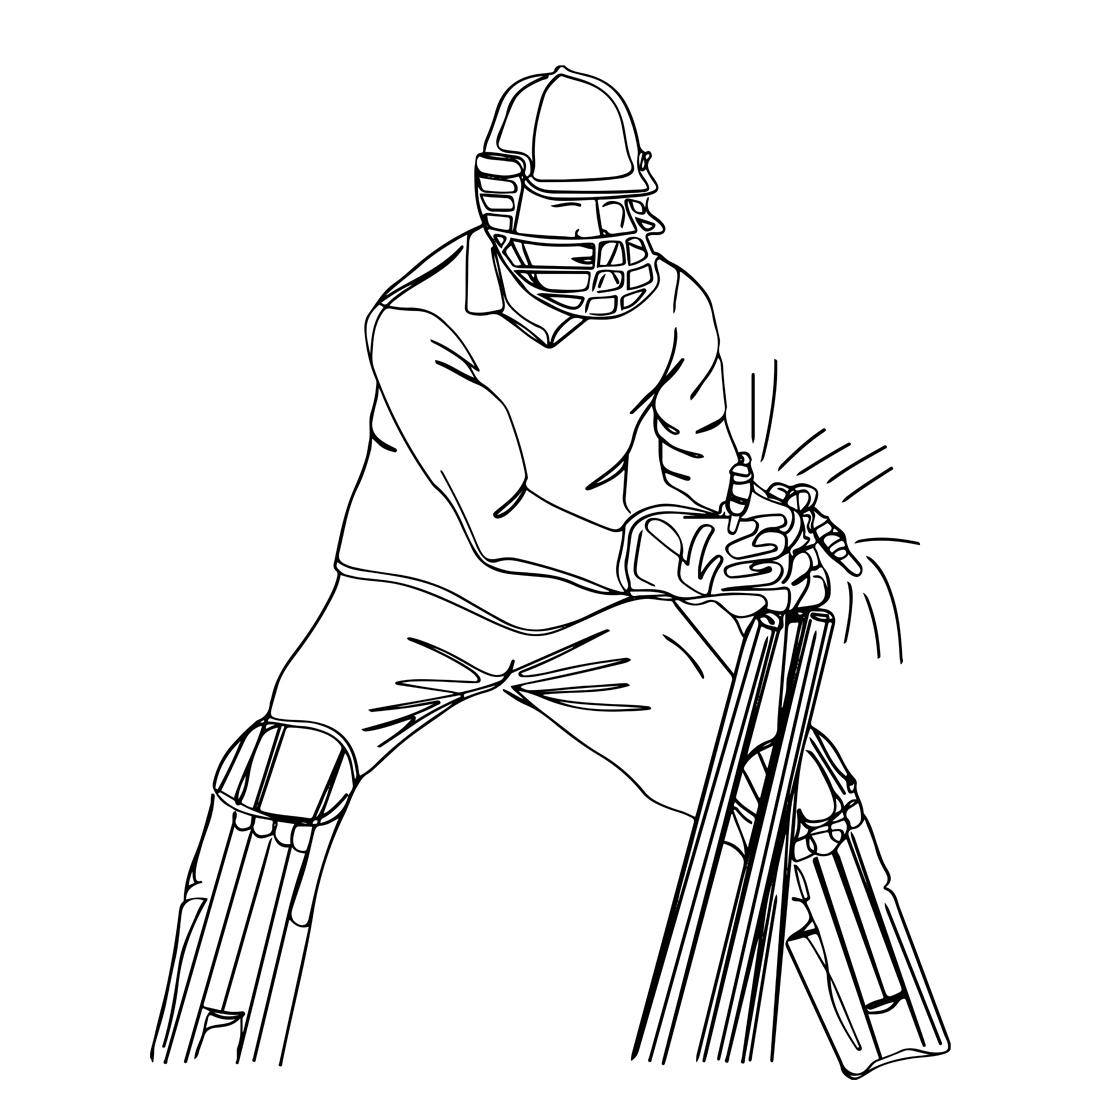 Dynamic Stumping Motion: One-Line Sketch of Cricket Wicket Keeper, Fast and Furious: Continuous Line Drawing of Wicket Keeper's Quick Stumping preview image.